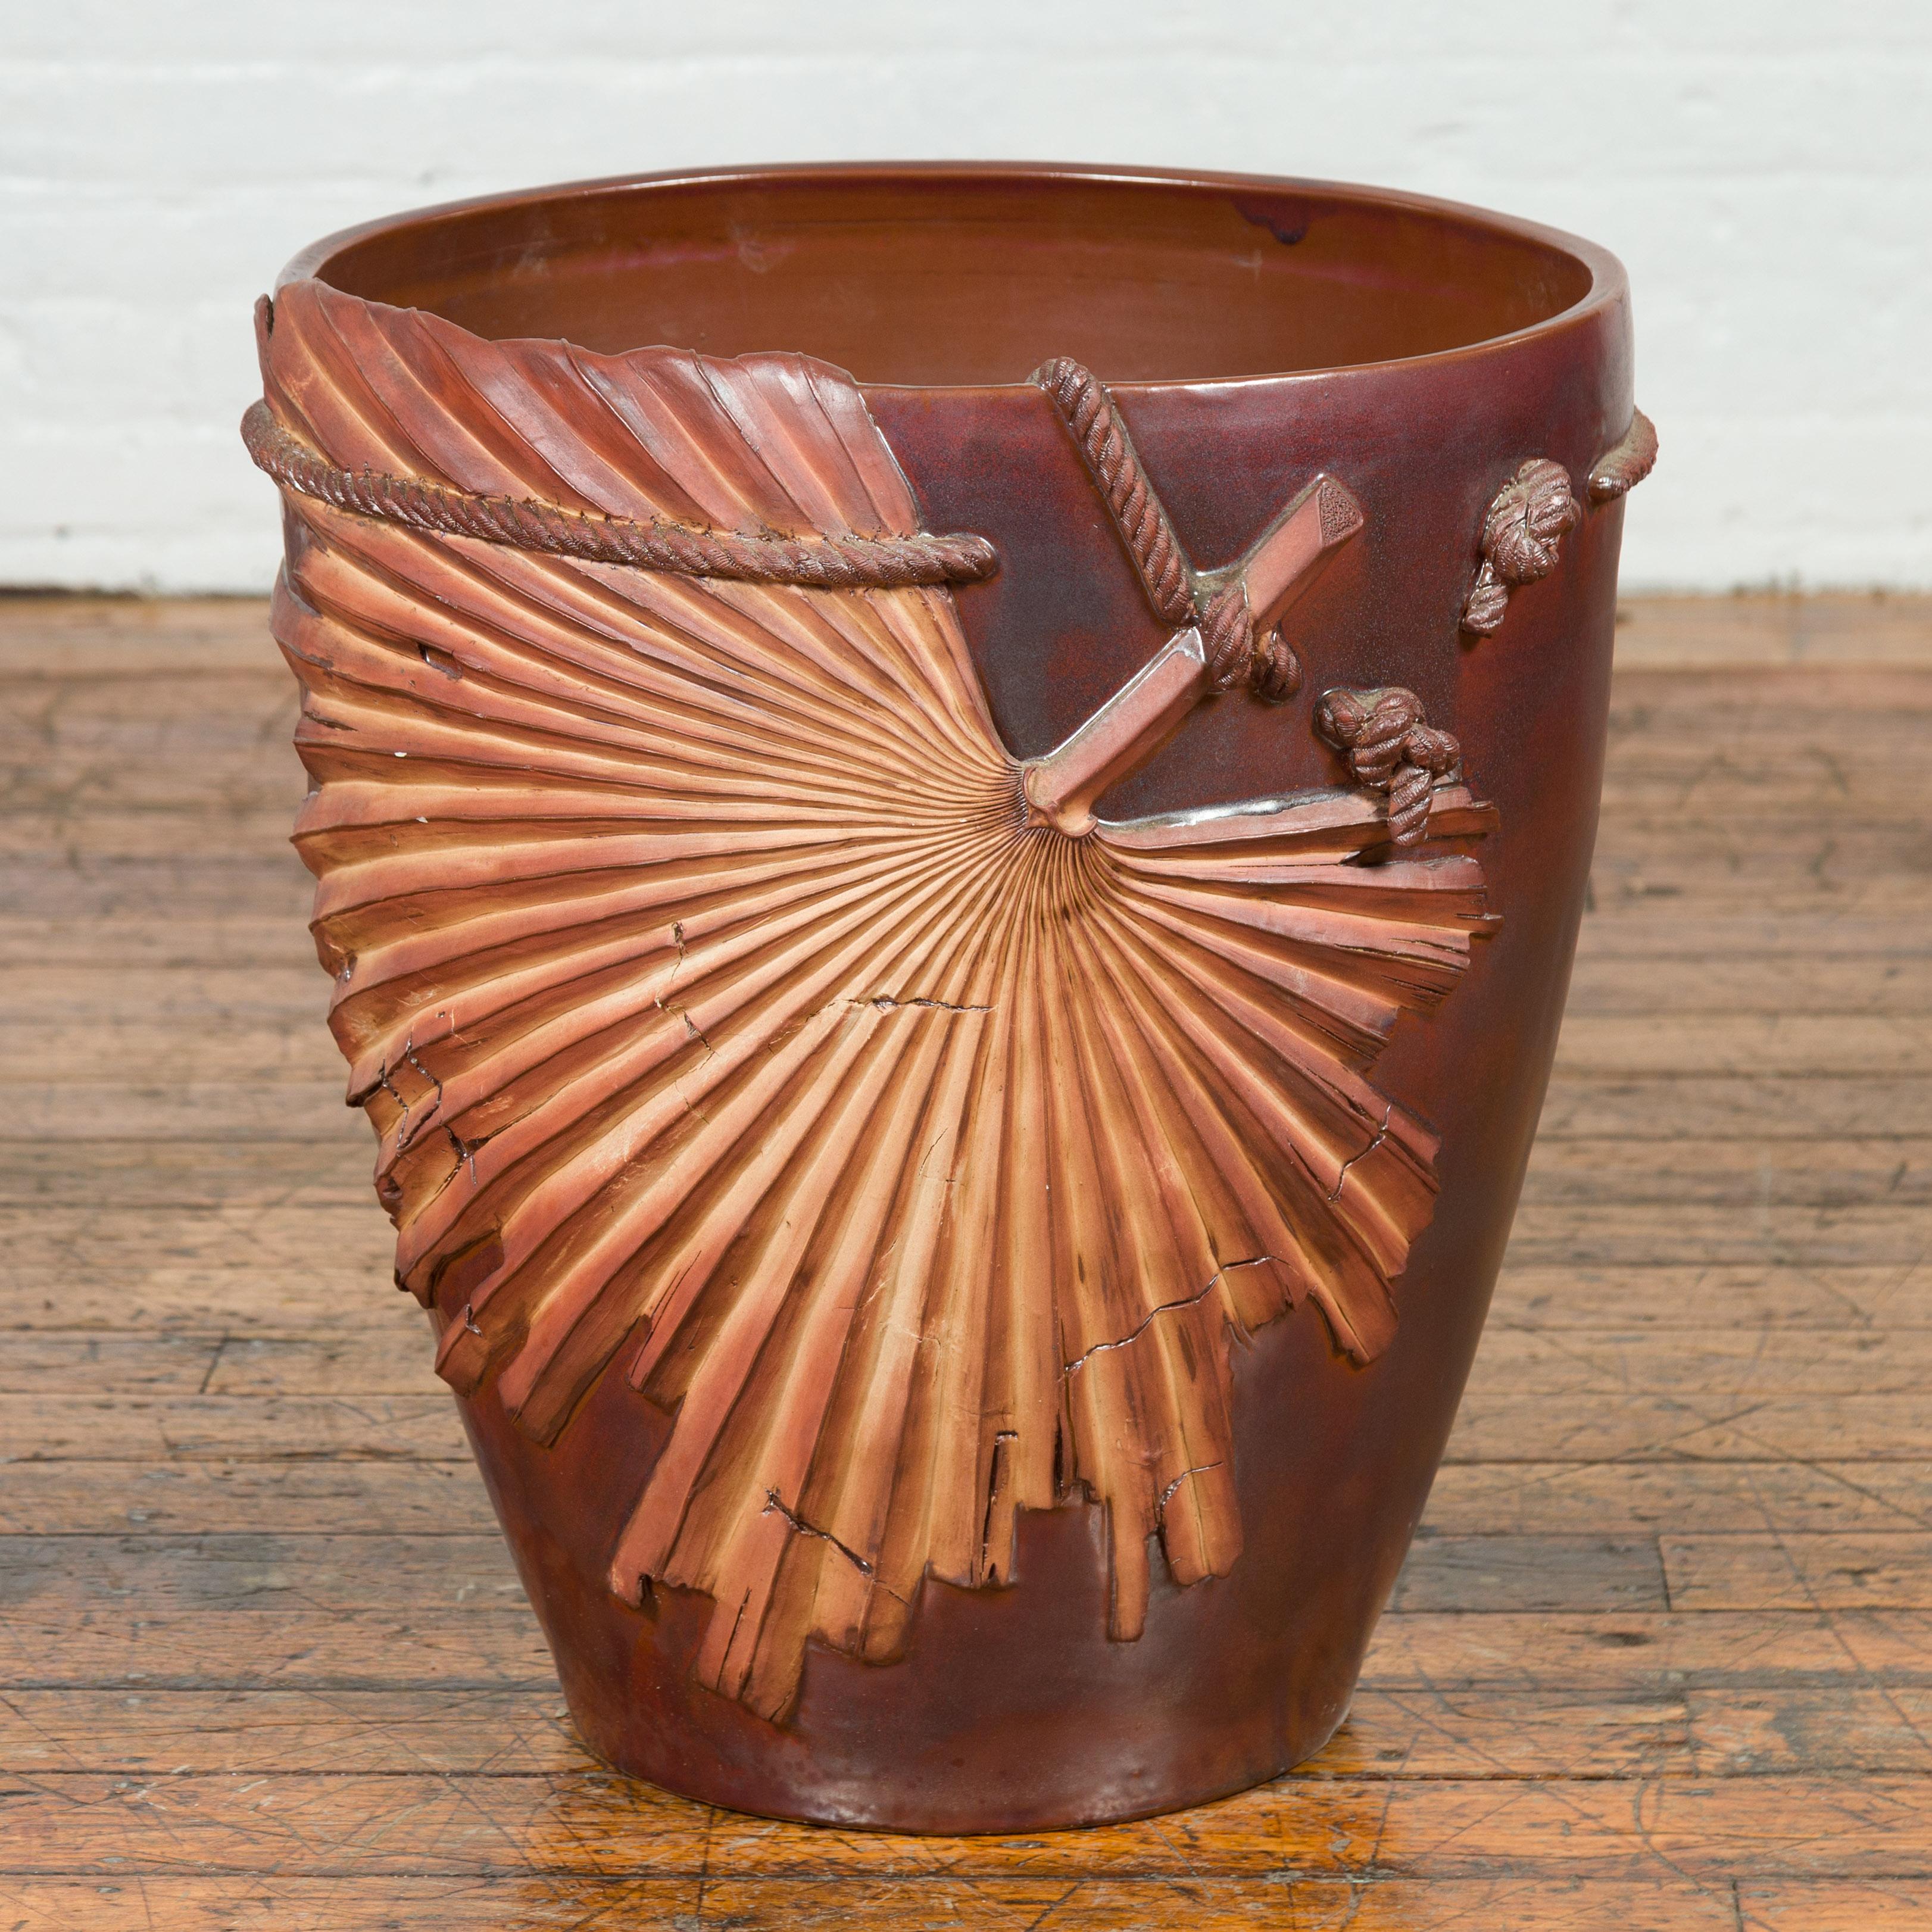 A large contemporary Thai garnet toned planter with palm leaf and rope motifs. We currently have two available, priced and sold individually (1,300 each). Look at image #3 to see them together. Created in Thailand, this large planter will draw the